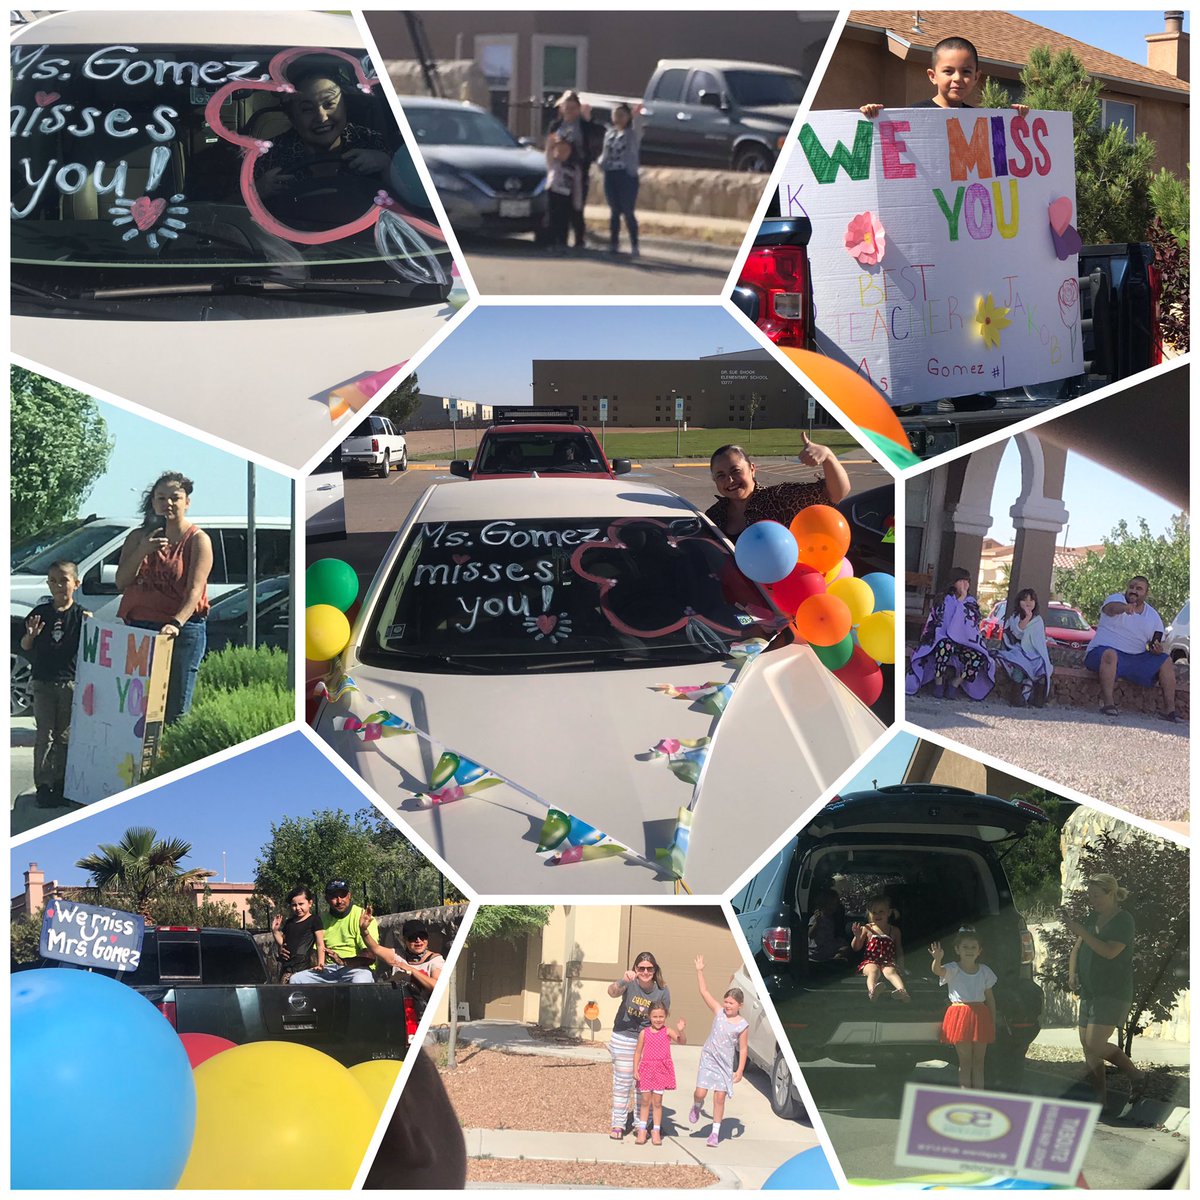 My heart was filled with joy as I saw a lot of my students in our school’s neighborhood parade today! I am glad I was able to bring a smile to their face! It was hard to drive as happy tears rolled down my face! I truly LOVE working for DSSE! #BeShookBeDauntless #TeamSISD